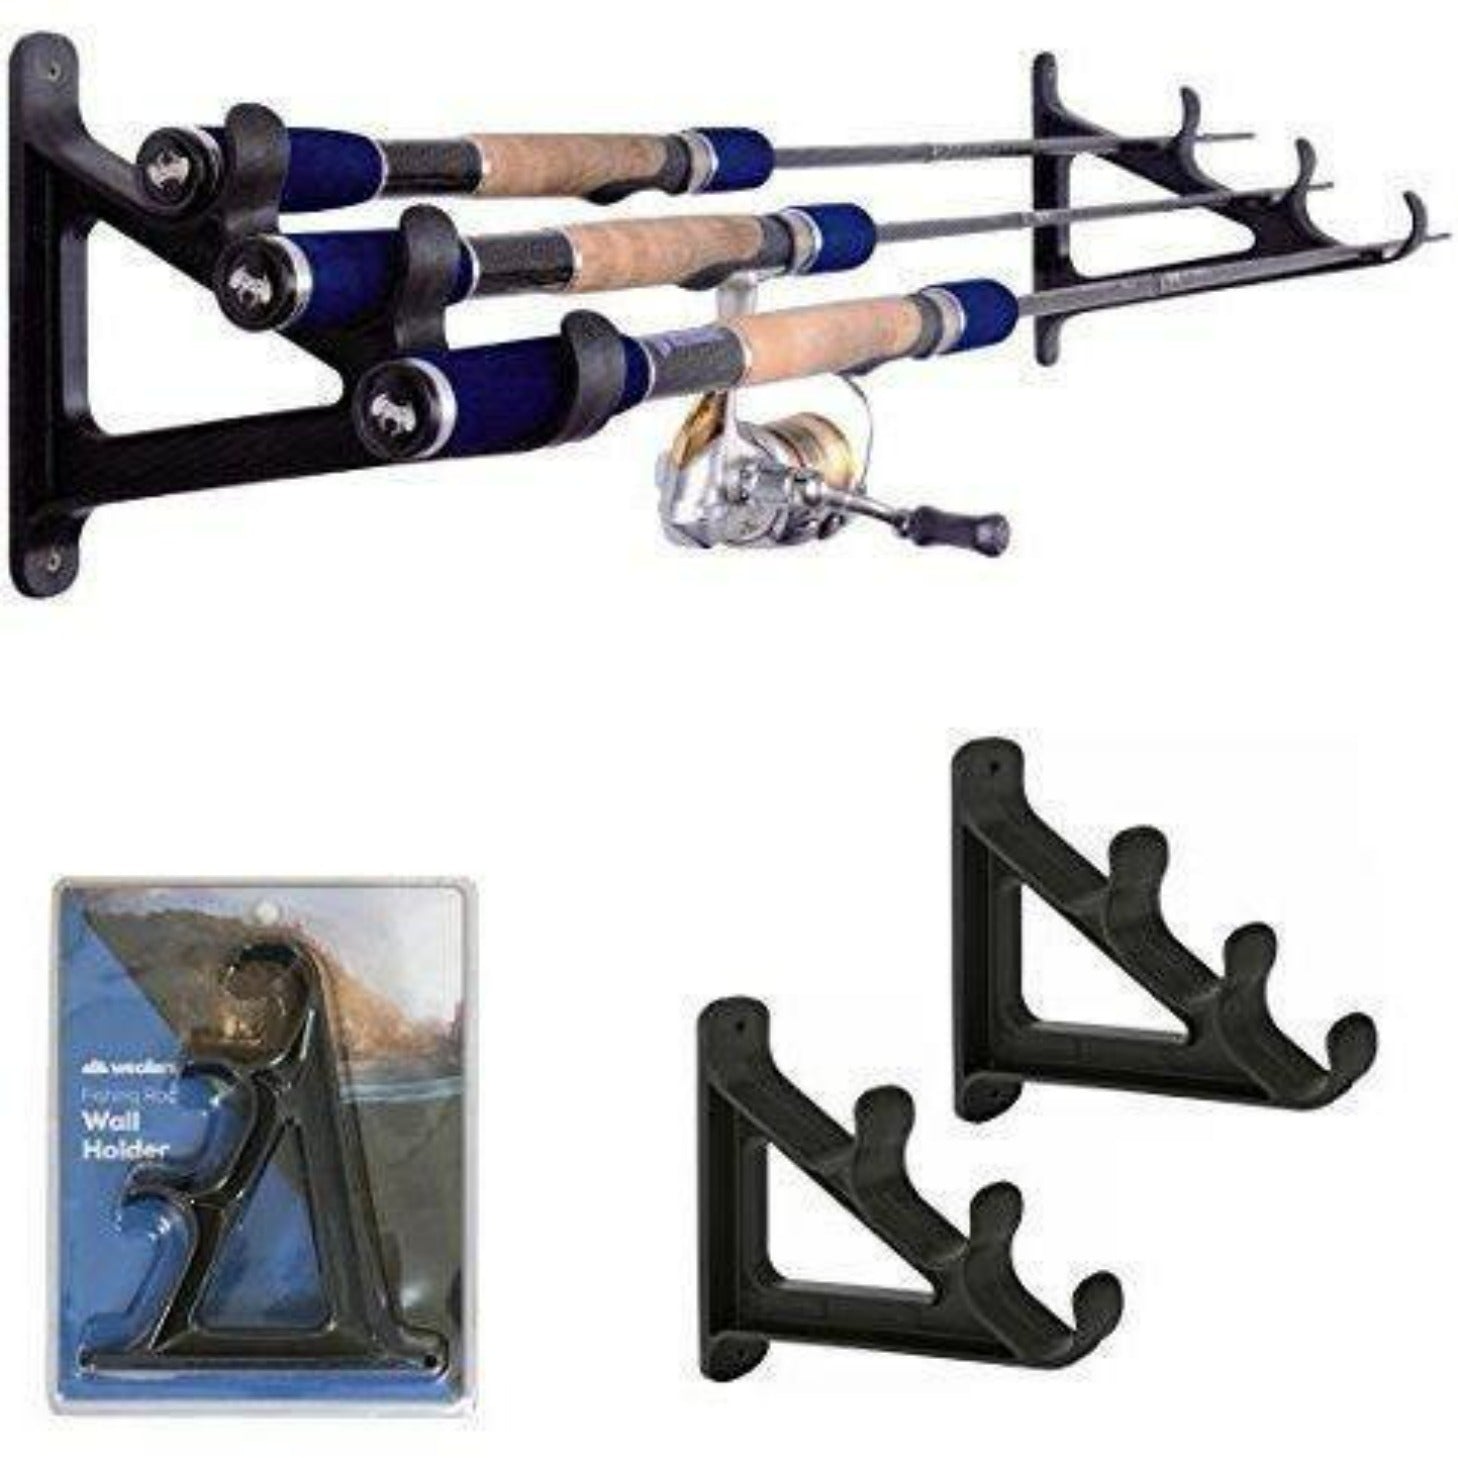 Fishing Rod Holders for Garage, Pole Organizer Rack Hold /10 Rods